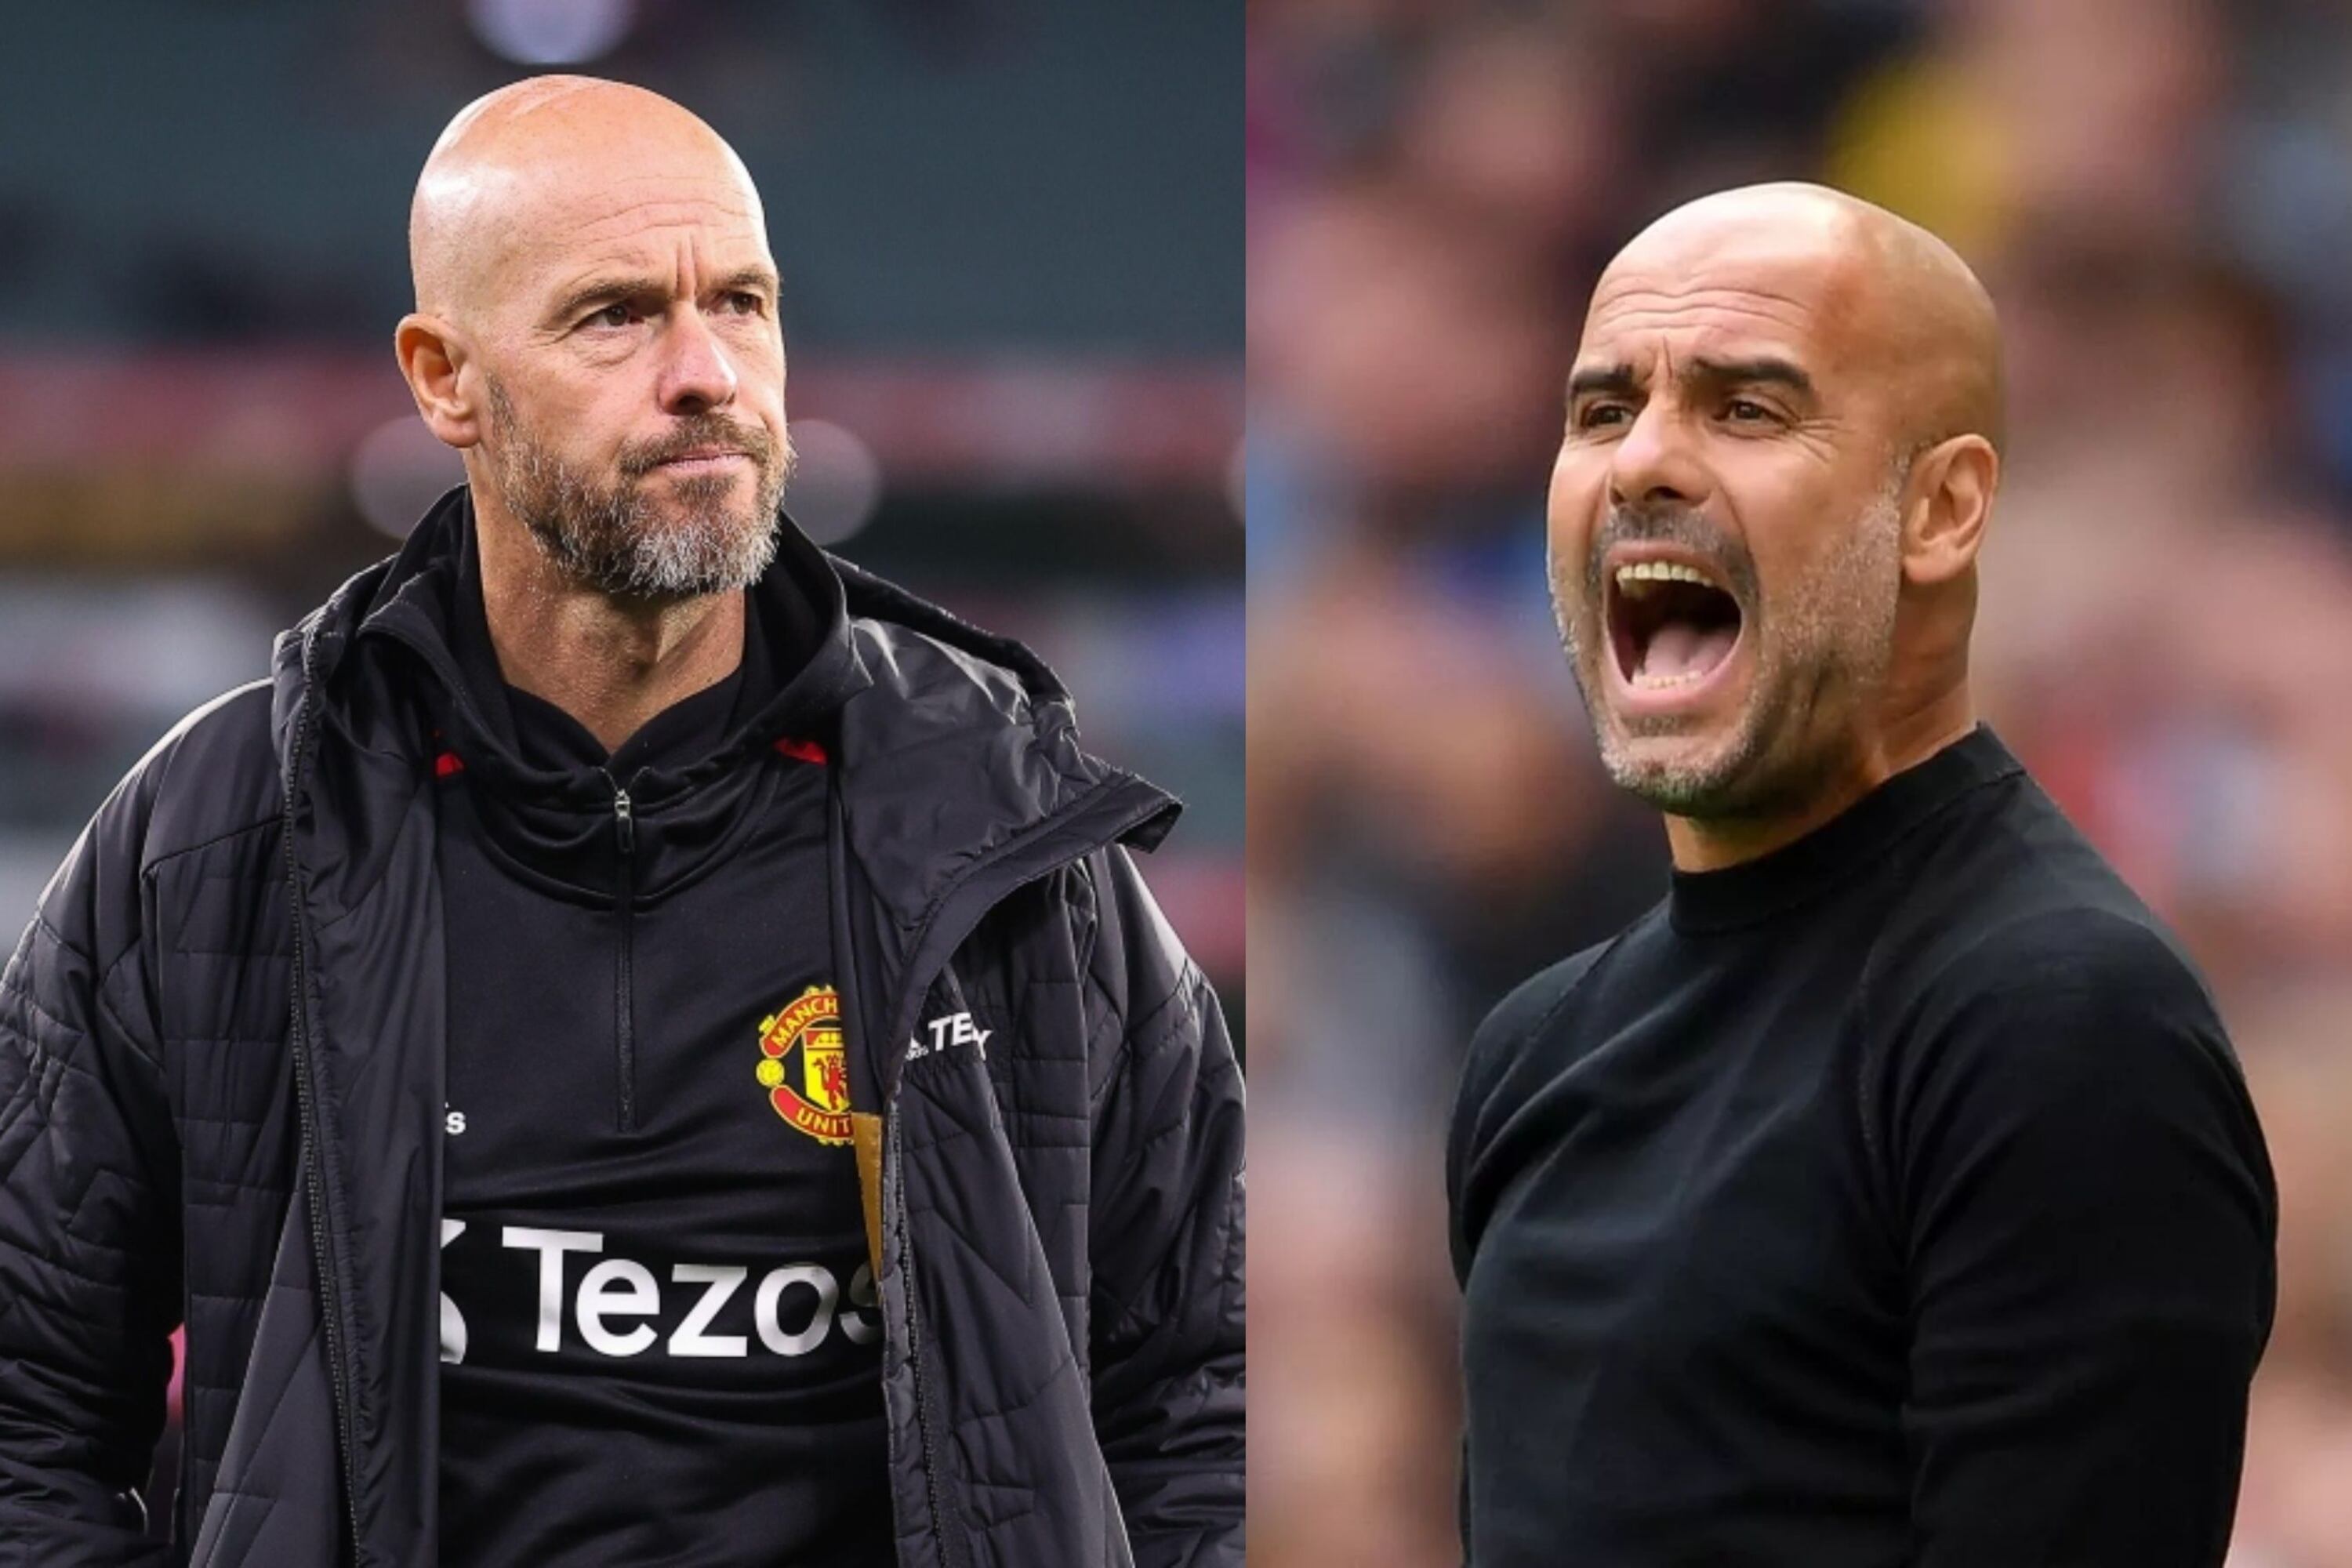 He arrived as a star at Man City, Guardiola belittled him and now he could play with Ten Hag